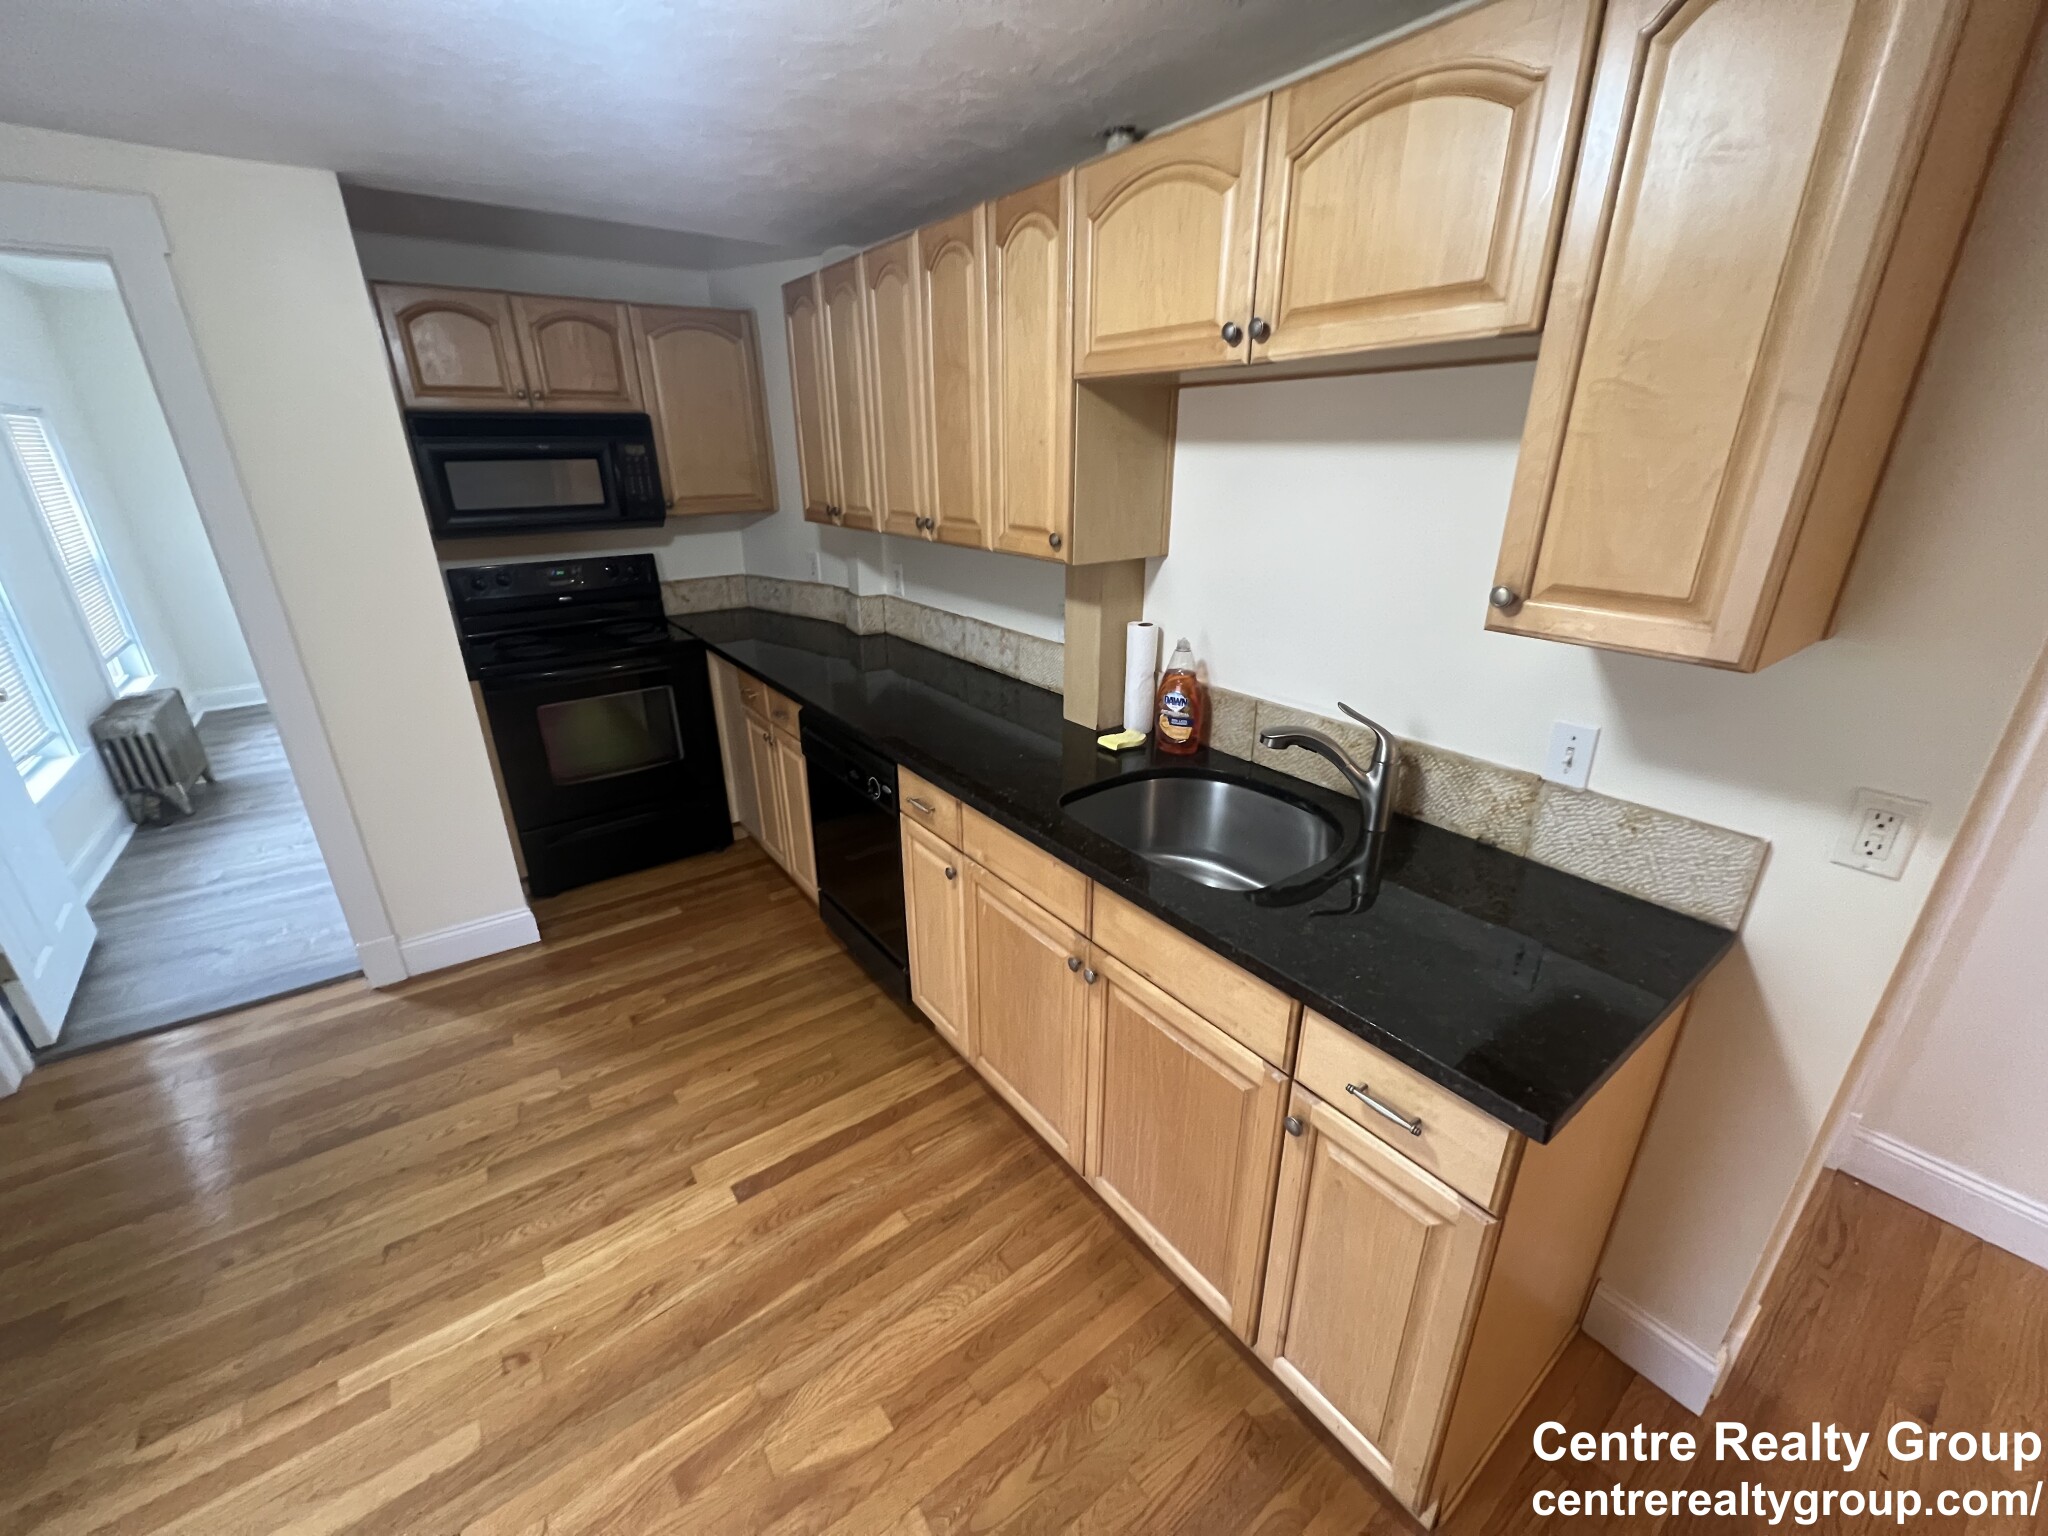 Photos of apartment on Graymore Rd.,Waltham MA 02453